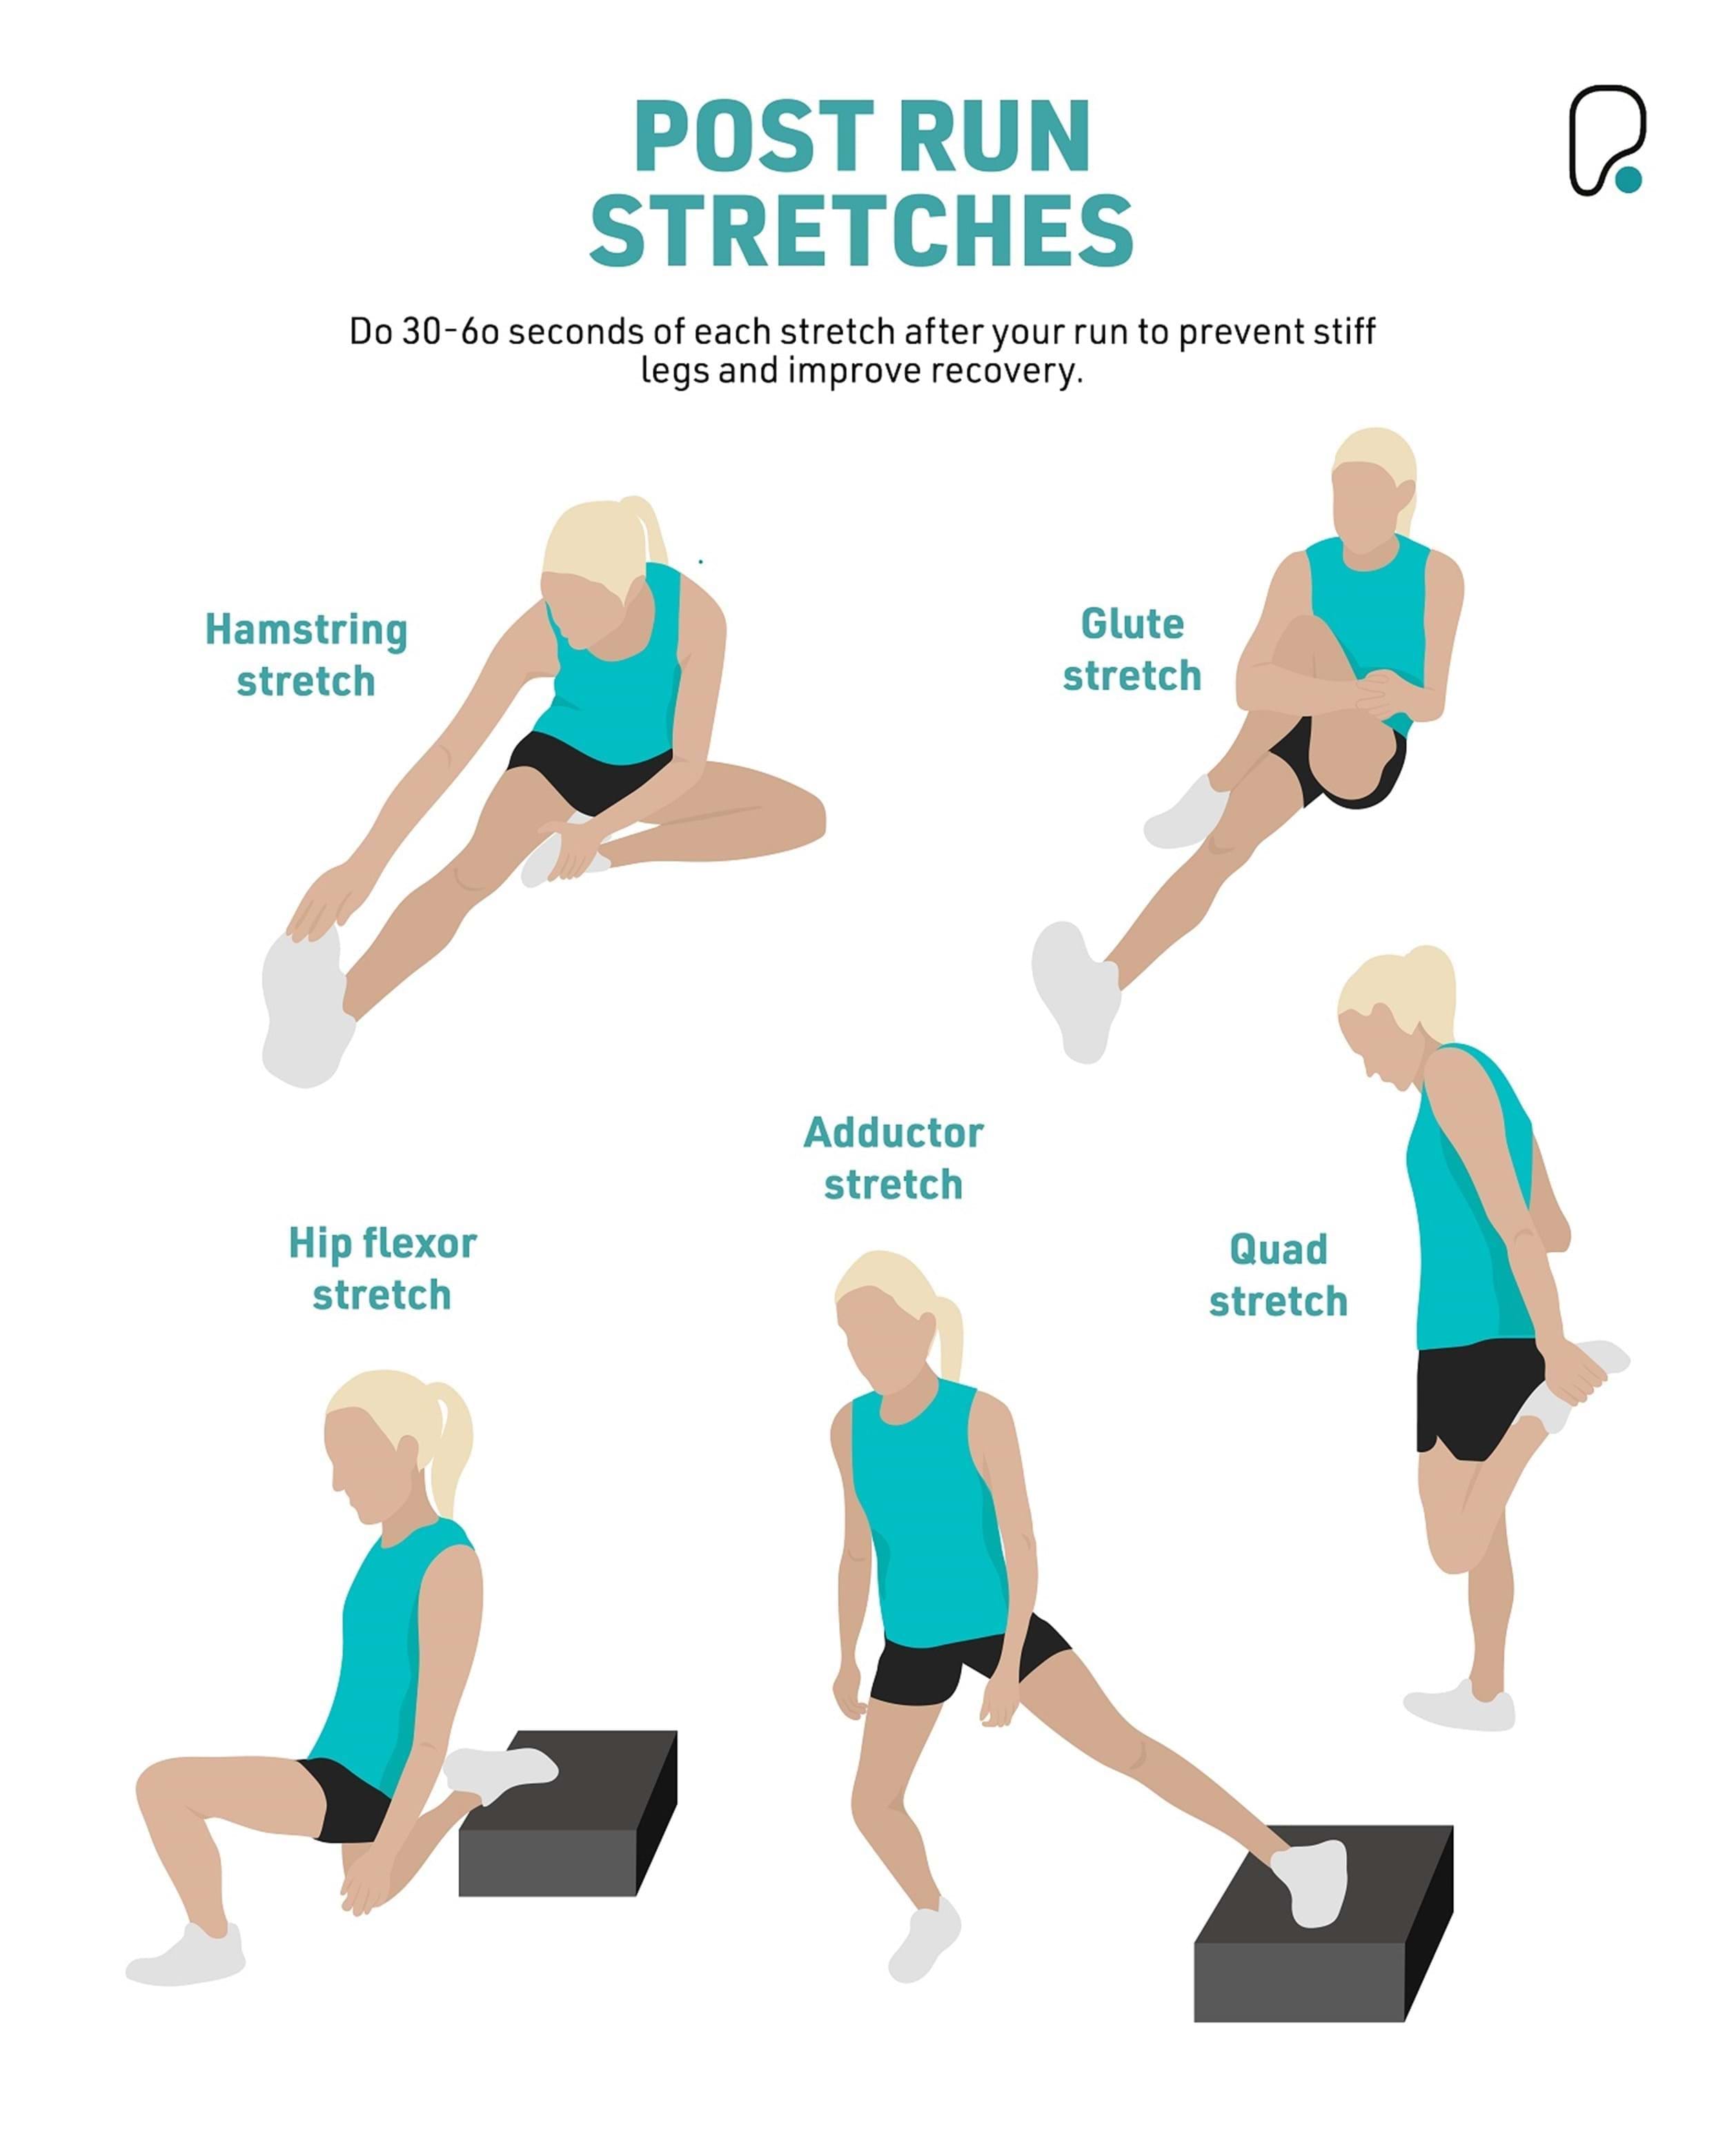 Post run stretches: Do 30-60 seconds of each stretch after your run to prevent stiff legs and improve recovery 